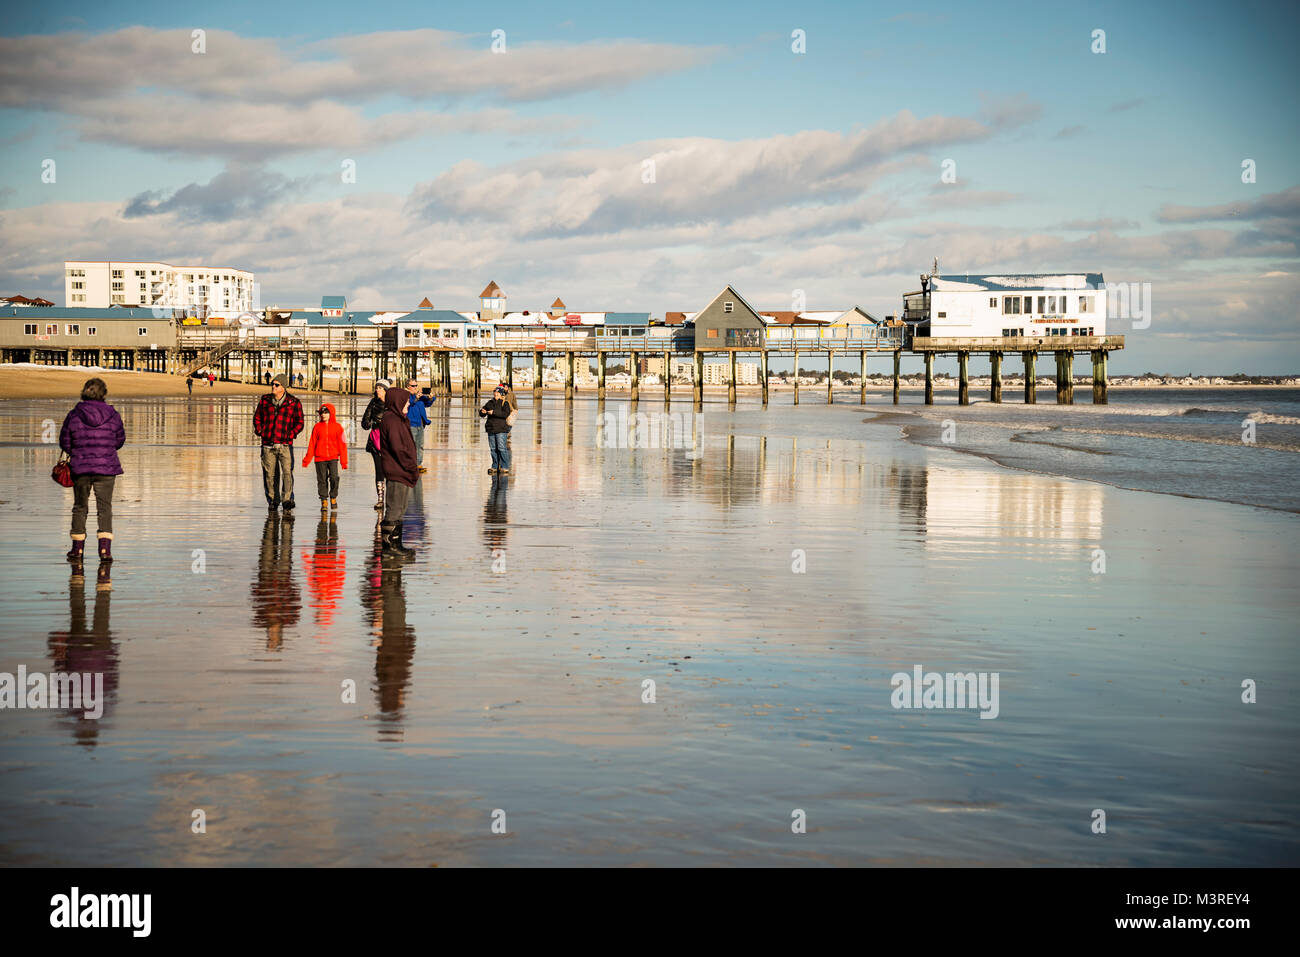 Pier in Old Orchard Beach, Maine. Stock Photo